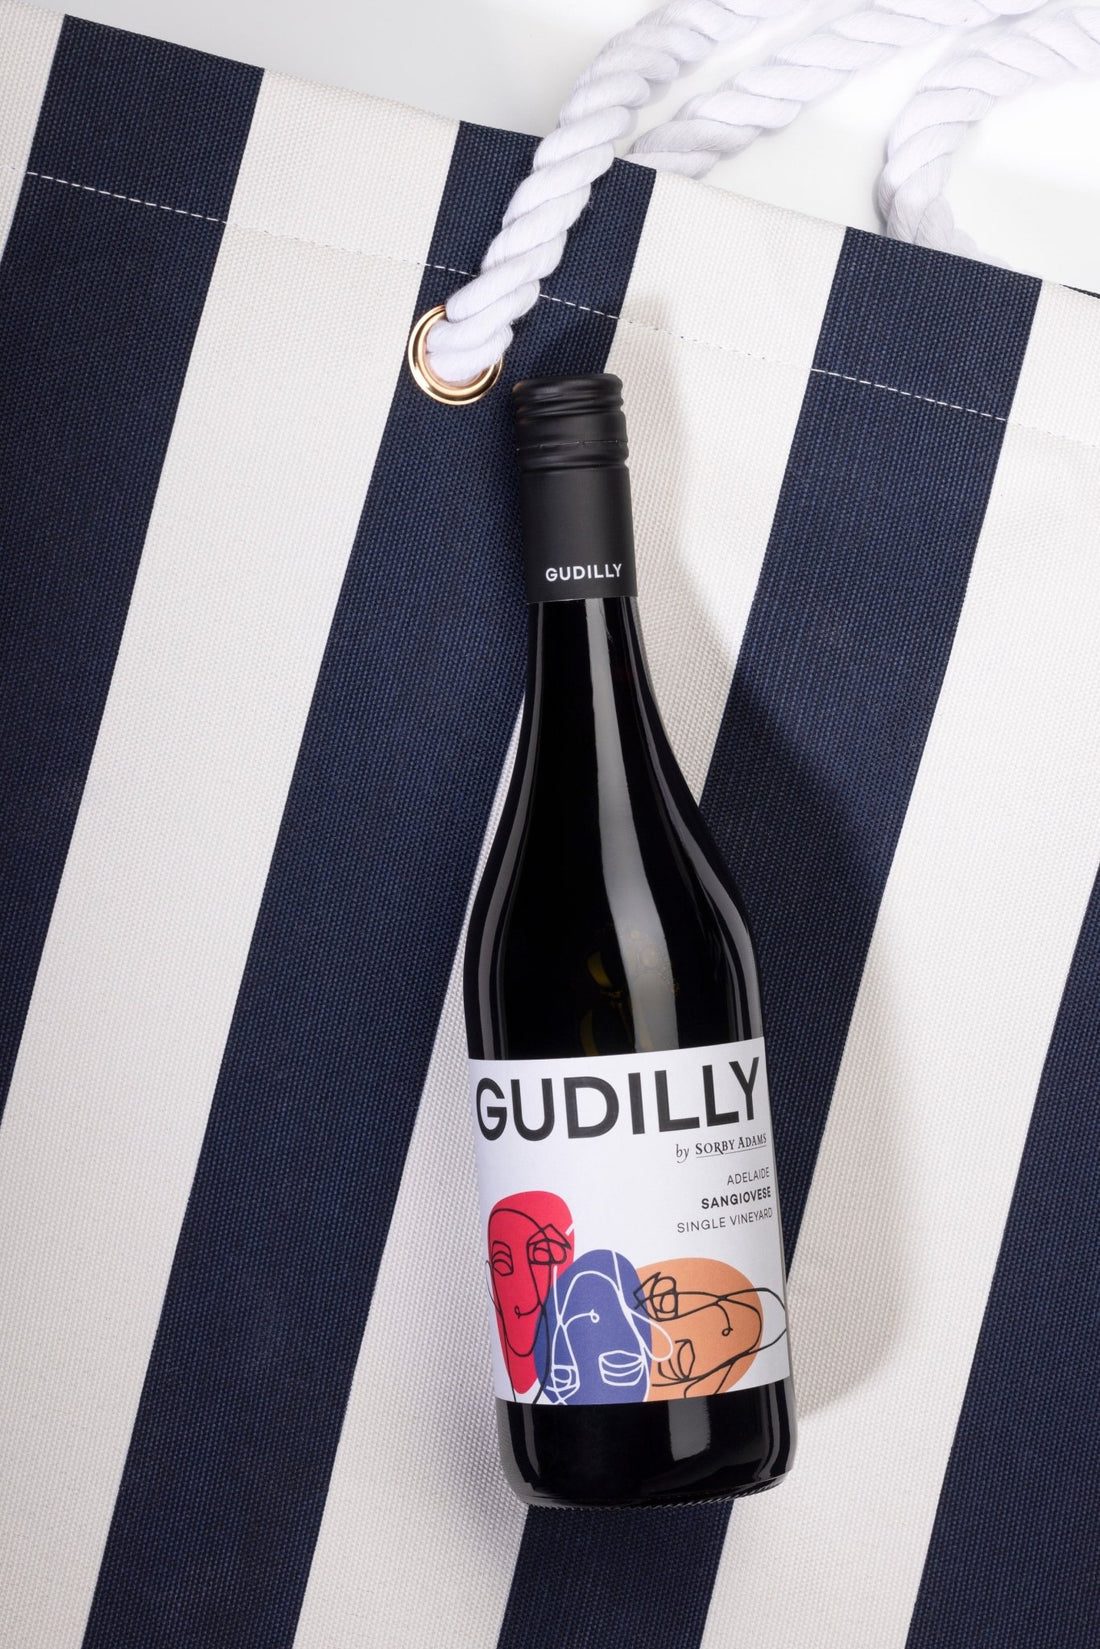 Gudilly Adelaide Sangiovese - Sangiovese - Sorby Adams Wines